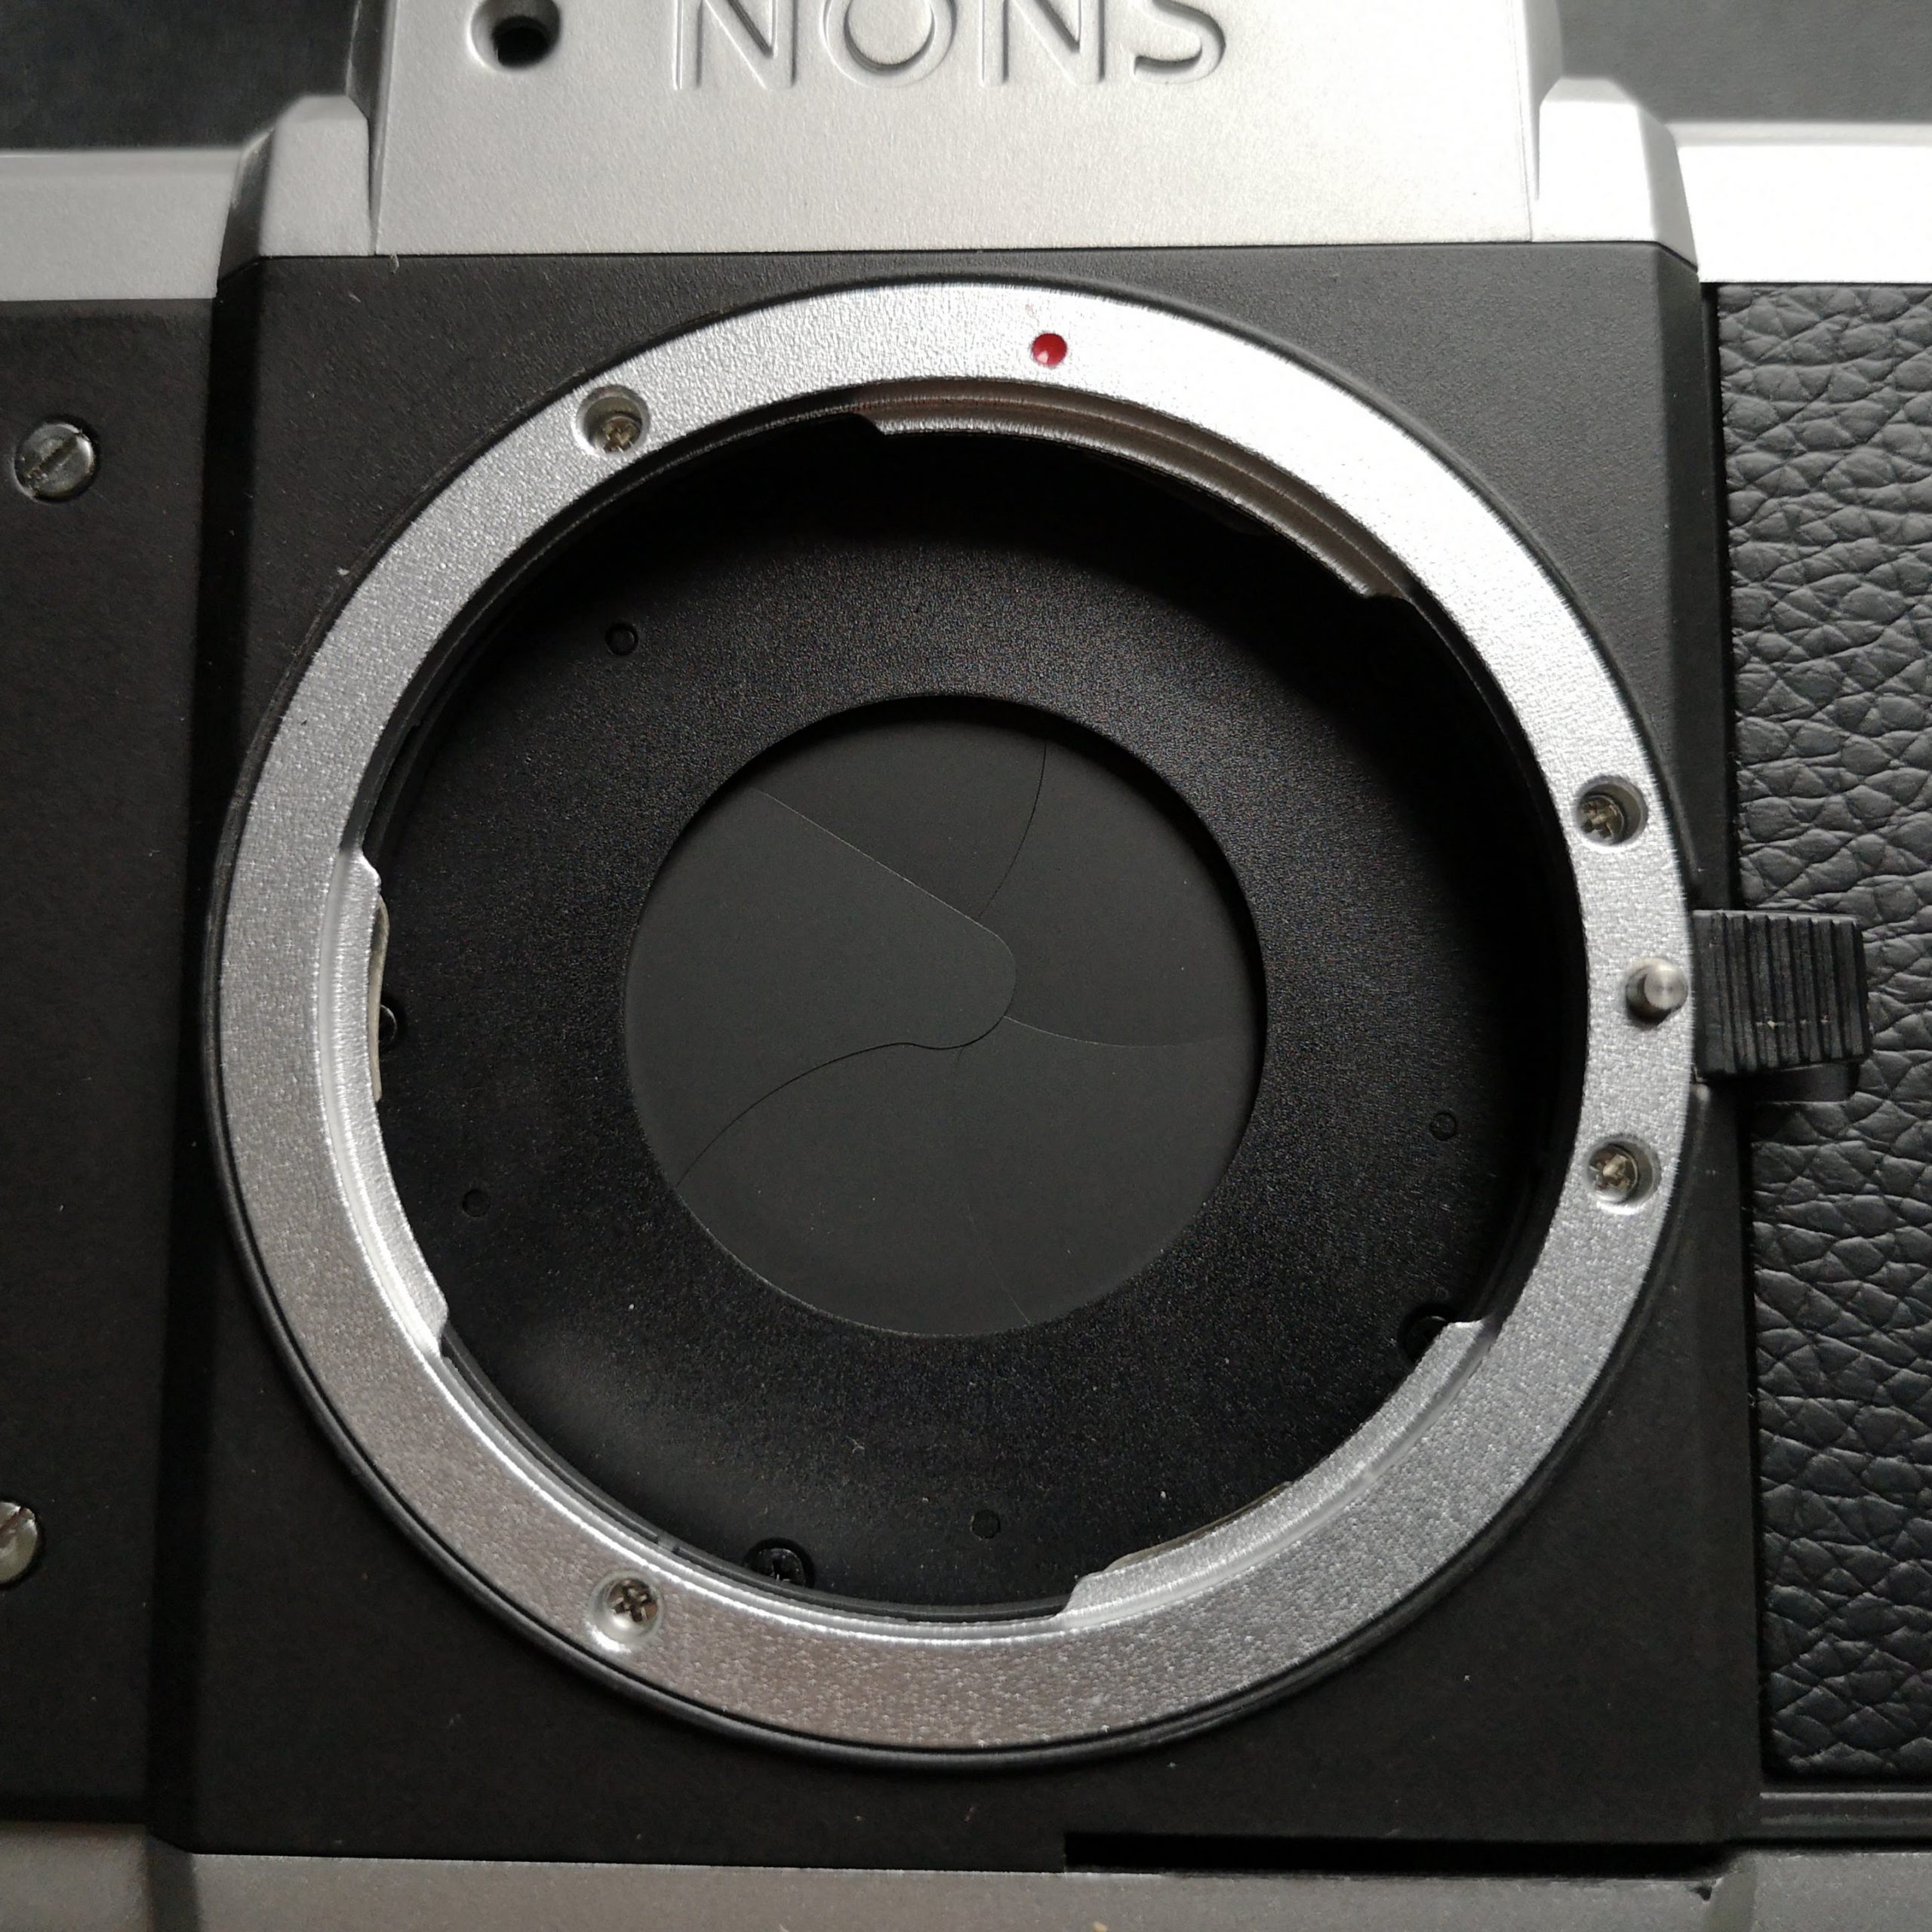 The Nons SL42 lens mount with close shutter blades